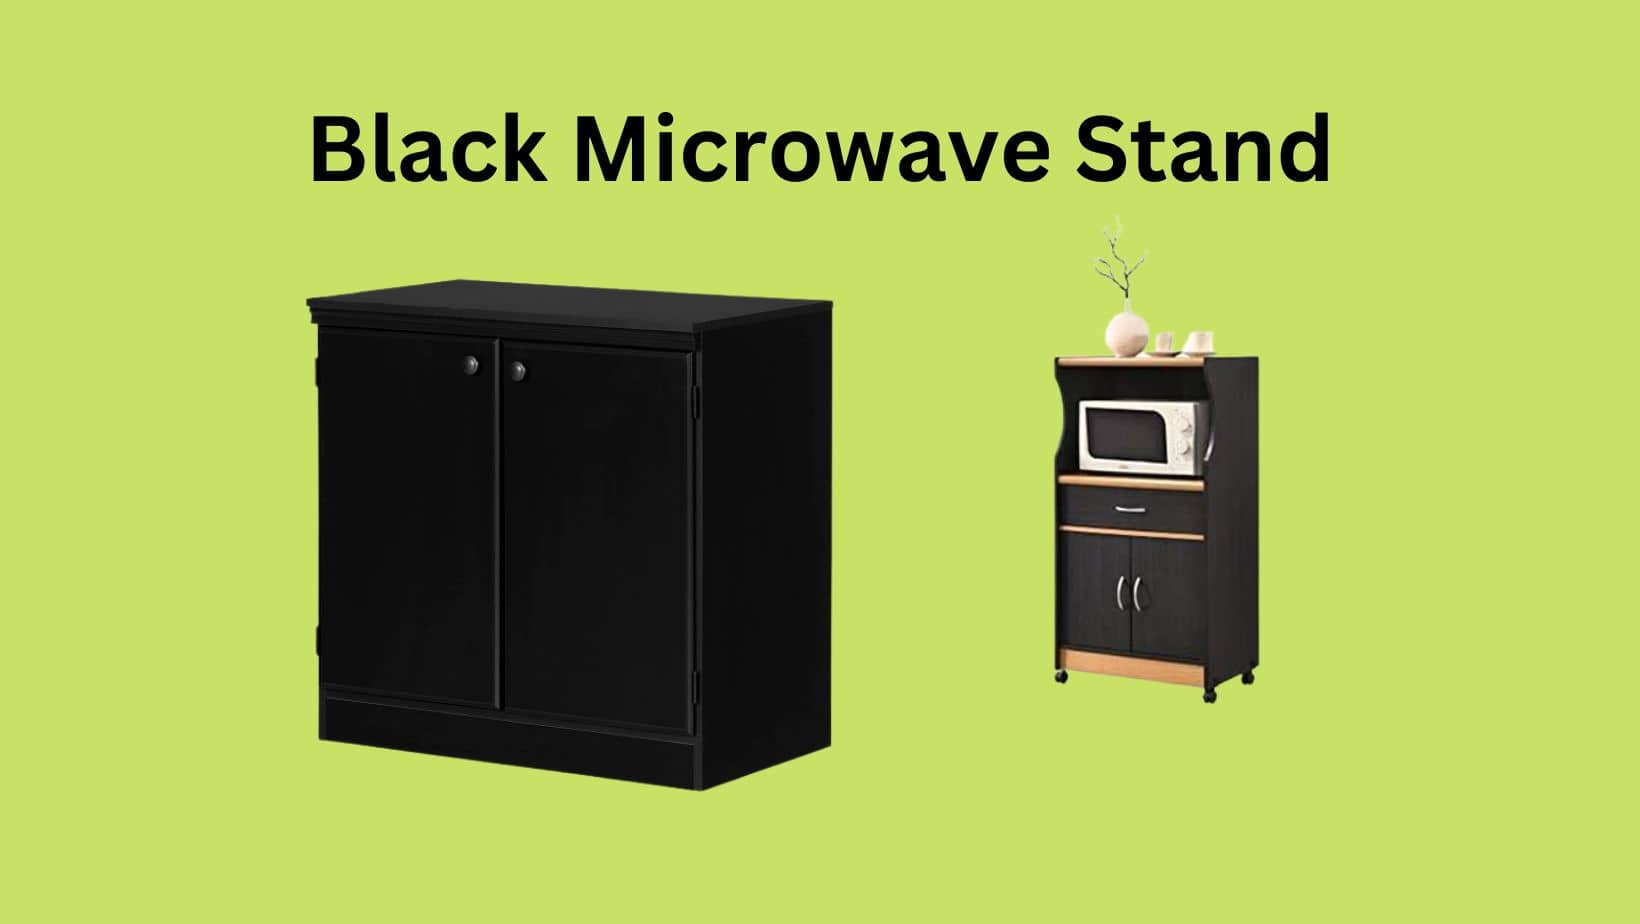 10 Best Black Microwave Stand (Buying Guide)